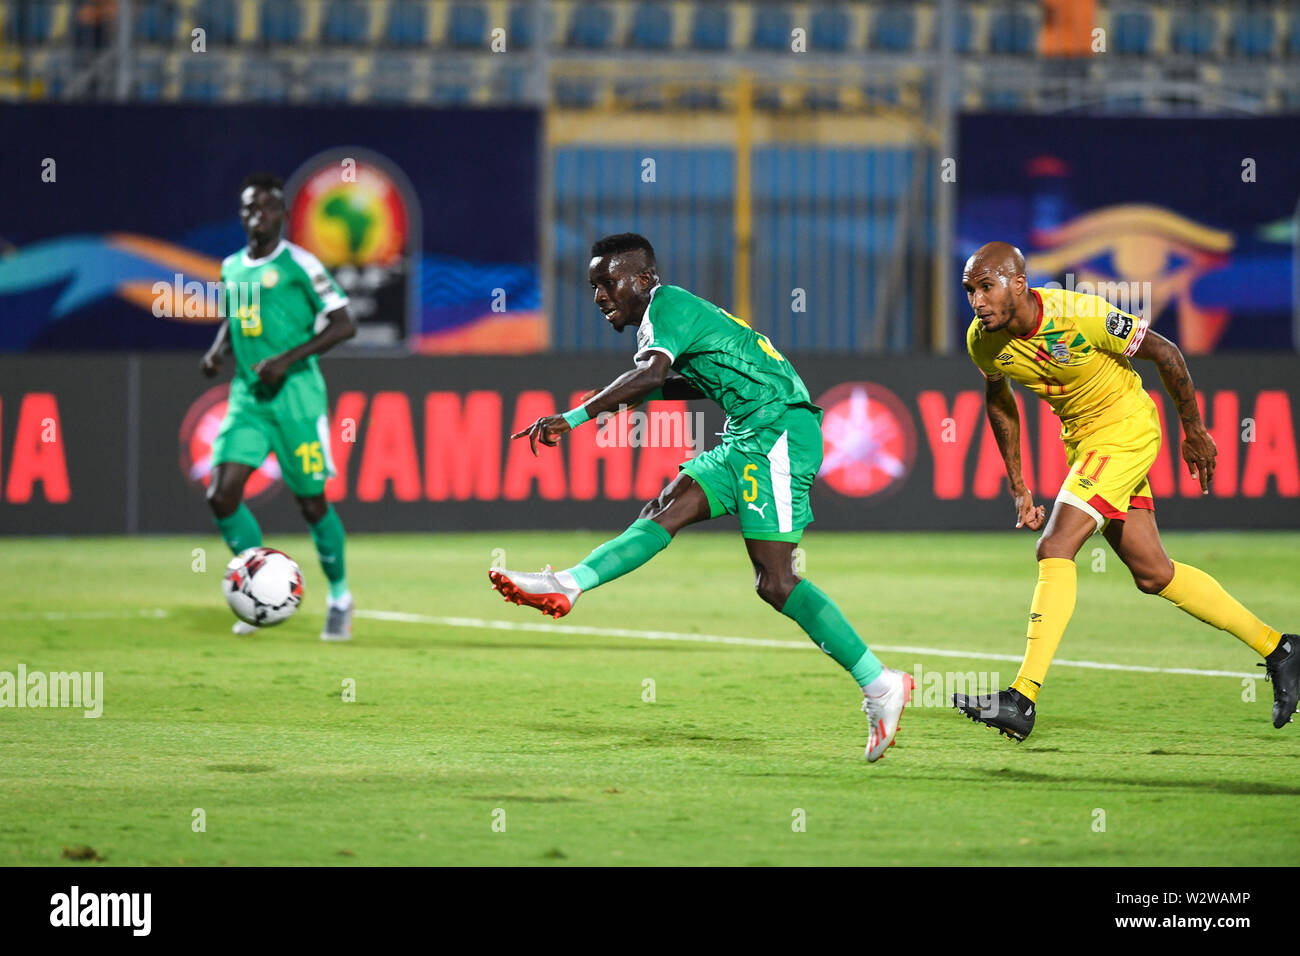 Cairo, Egypt. 10th July, 2019. Idrissa Gana Gueye (C) of Senegal scores during the quarterfinal between Senegal and Benin at the 2019 African Cup of Nations in Cairo, Egypt, July 10, 2019. Credit: Li Yan/Xinhua/Alamy Live News Stock Photo